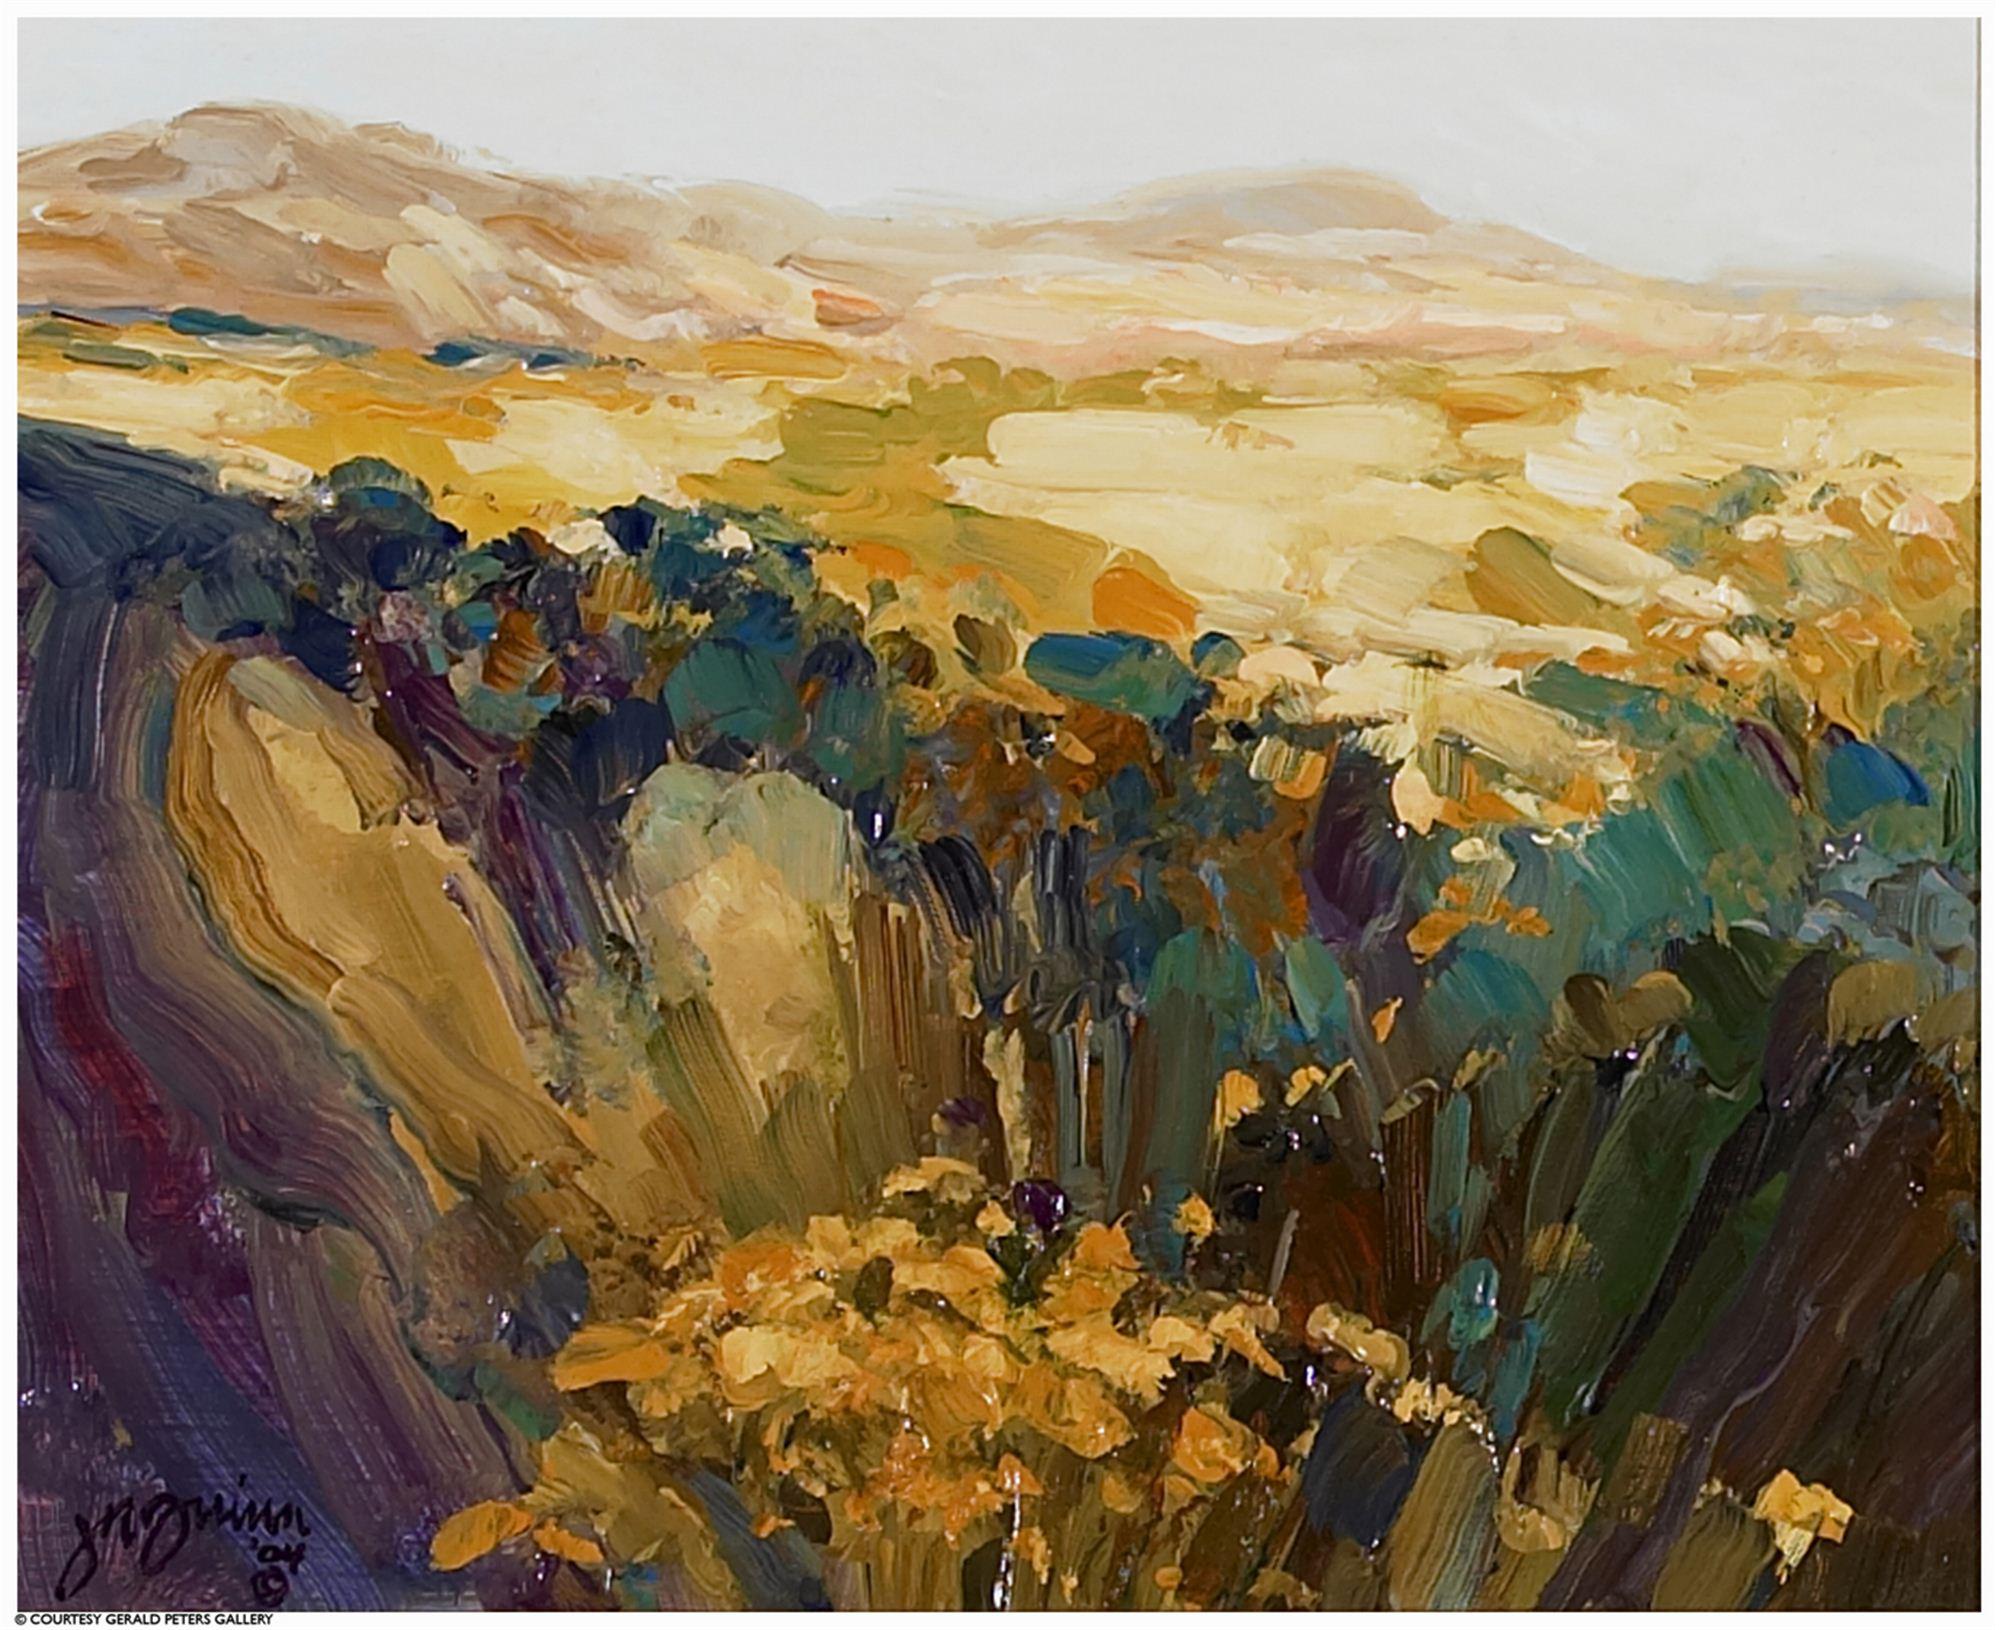 
							

									Jeri Nichols Quinn									Canyon Chamisa 									oil on board<br />
6 3/4 x 8 1/2 inches									


							